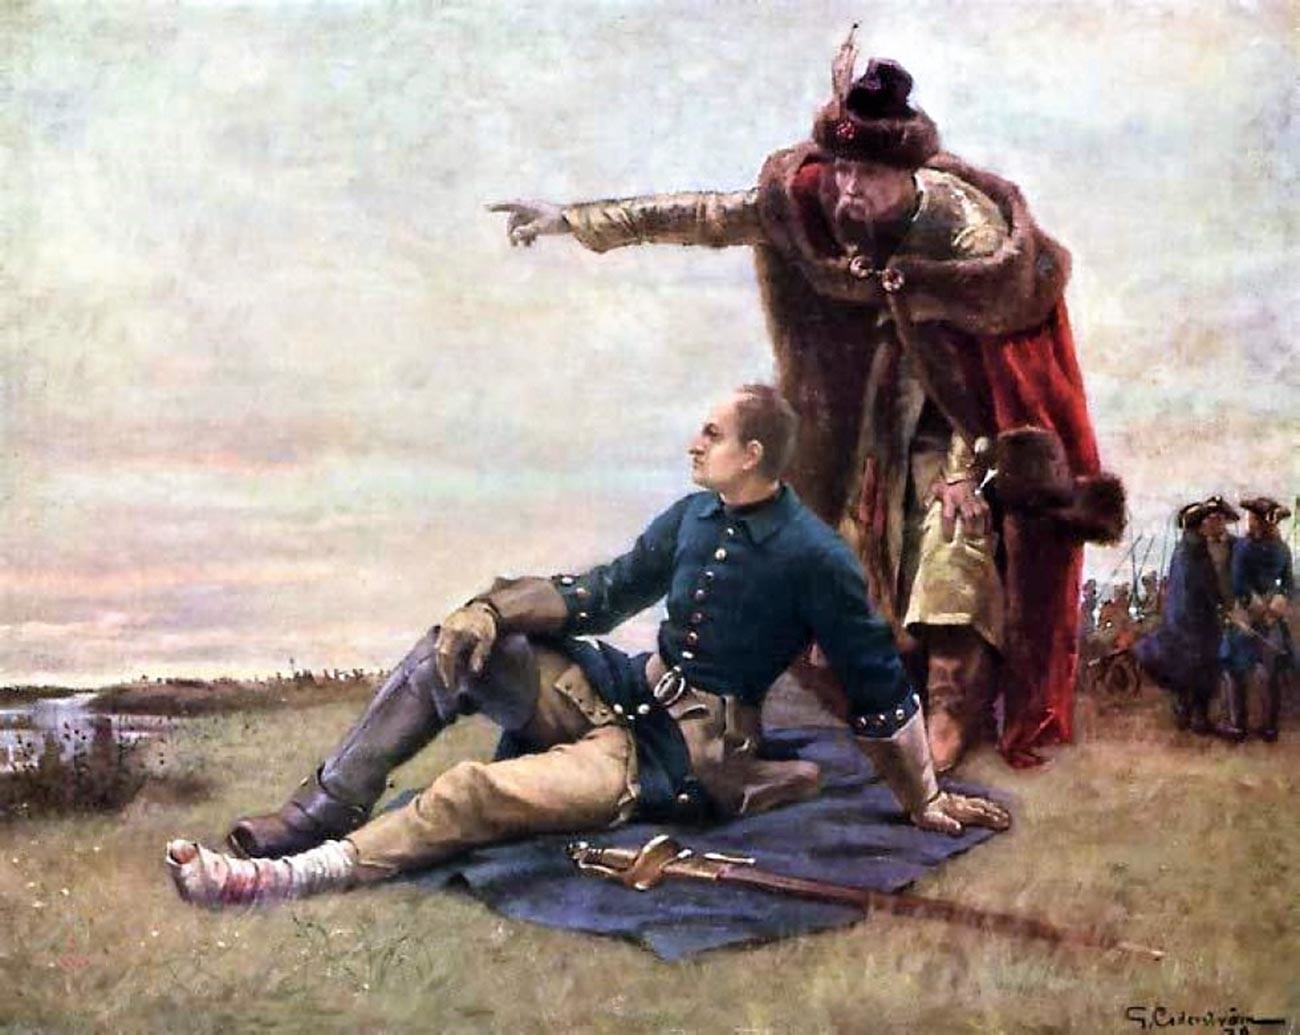 Charles XII of Sweden and Ivan Mazepa after the Battle of Poltava.